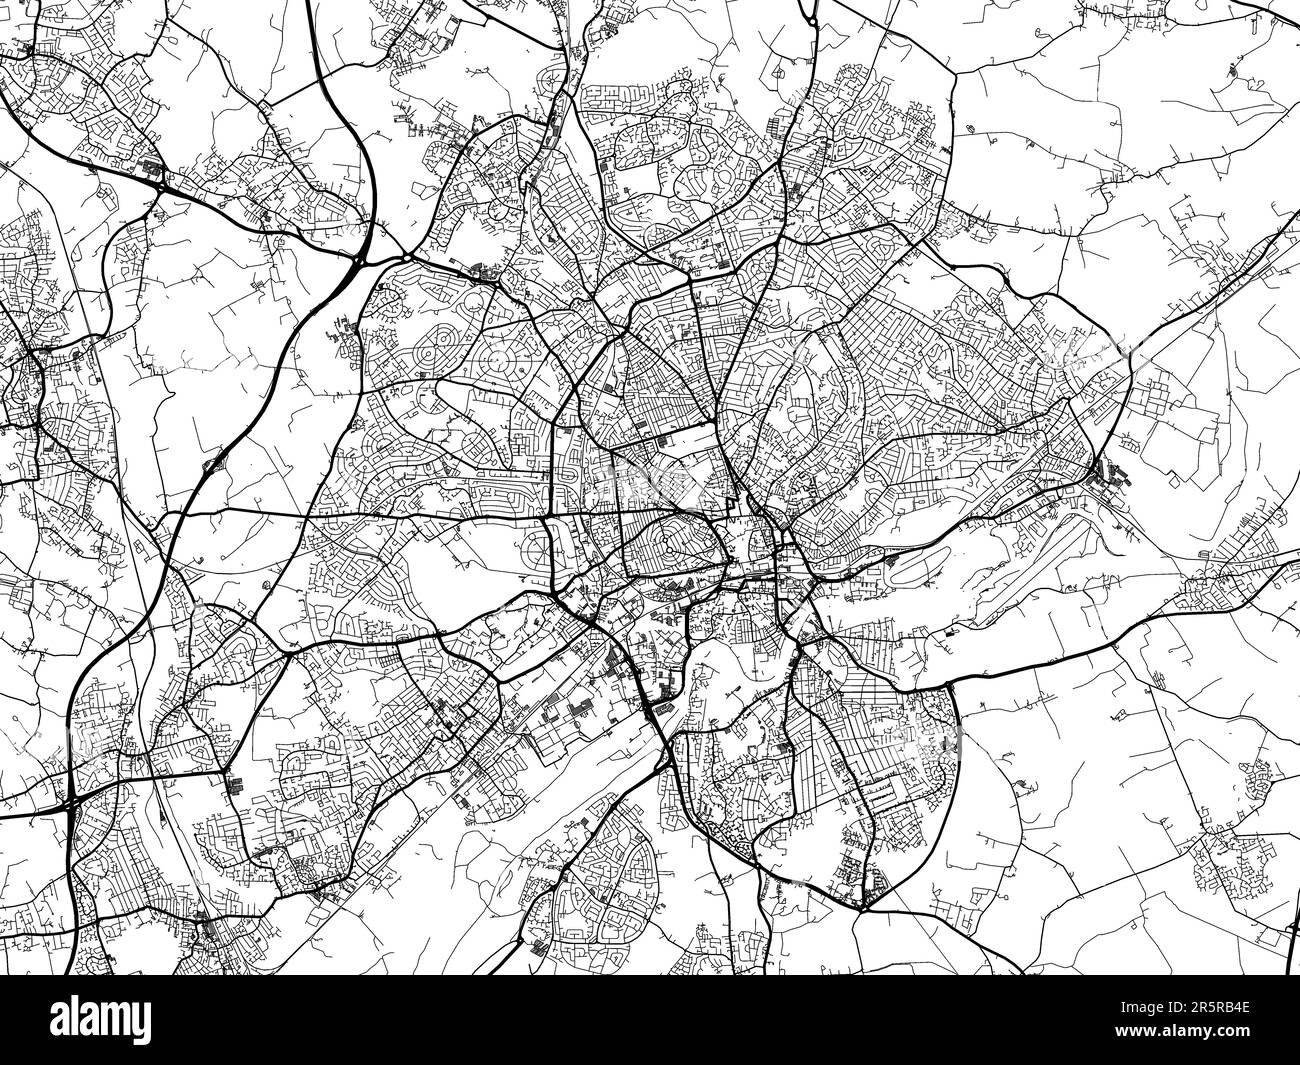 Road map of the city of  Nottingham in the United Kingdom on a white background. Stock Photo